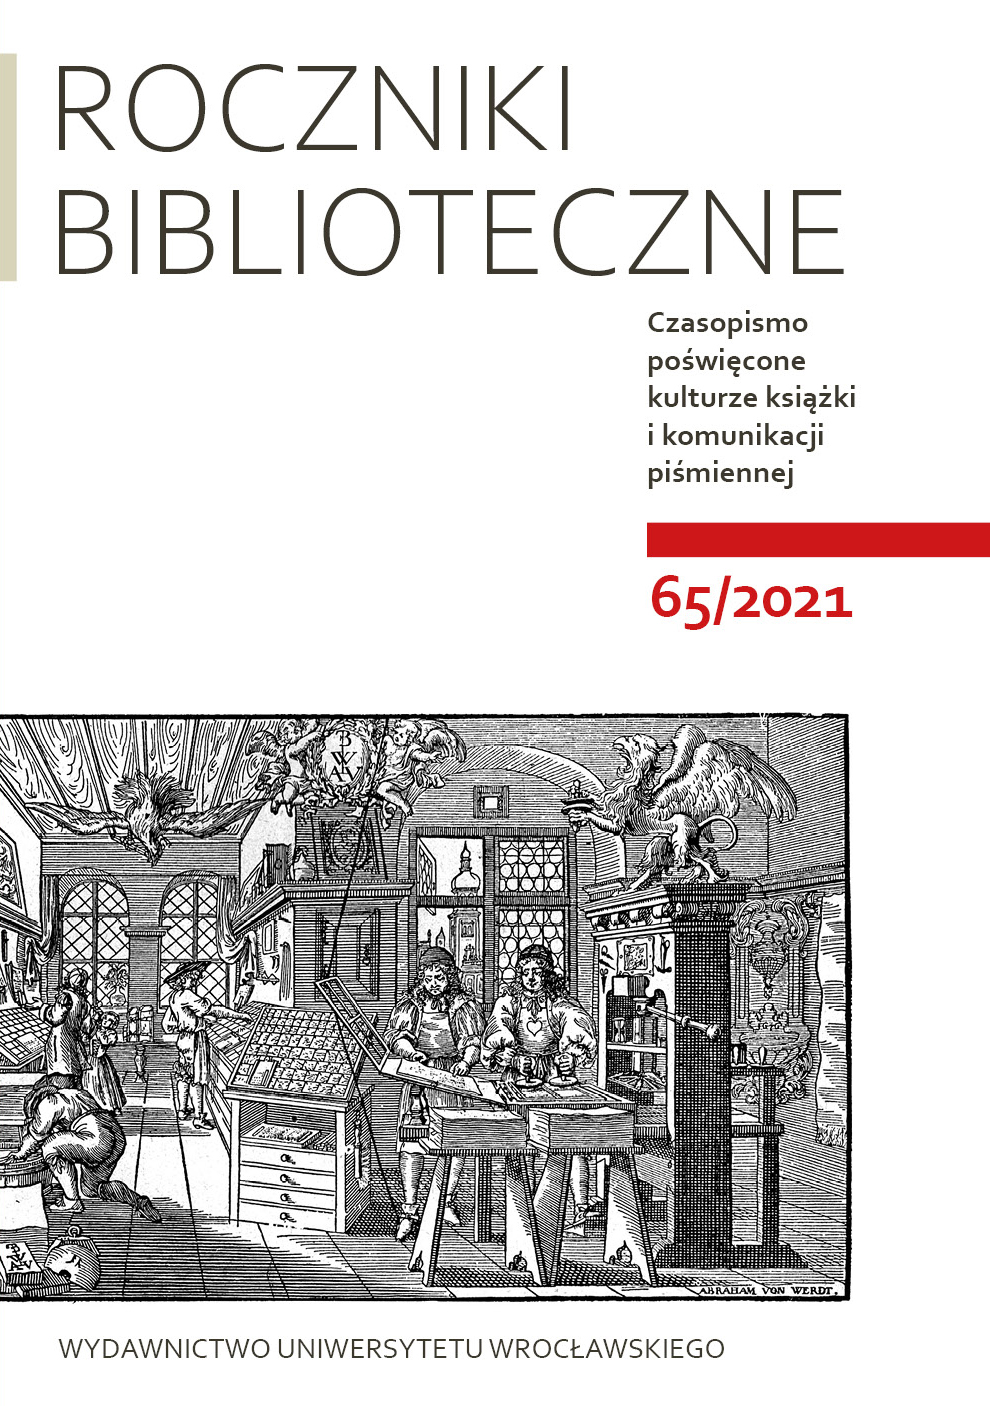 Michał Spandowski, Catalogue of Incunabula in the National Library ofPoland, in collaboration with Sławomir Szyller, descriptions of book bindings prepared by Maria Brynda, Warsaw: National Library of Poland, 2020, 2 vols., 695+382 pp. Cover Image